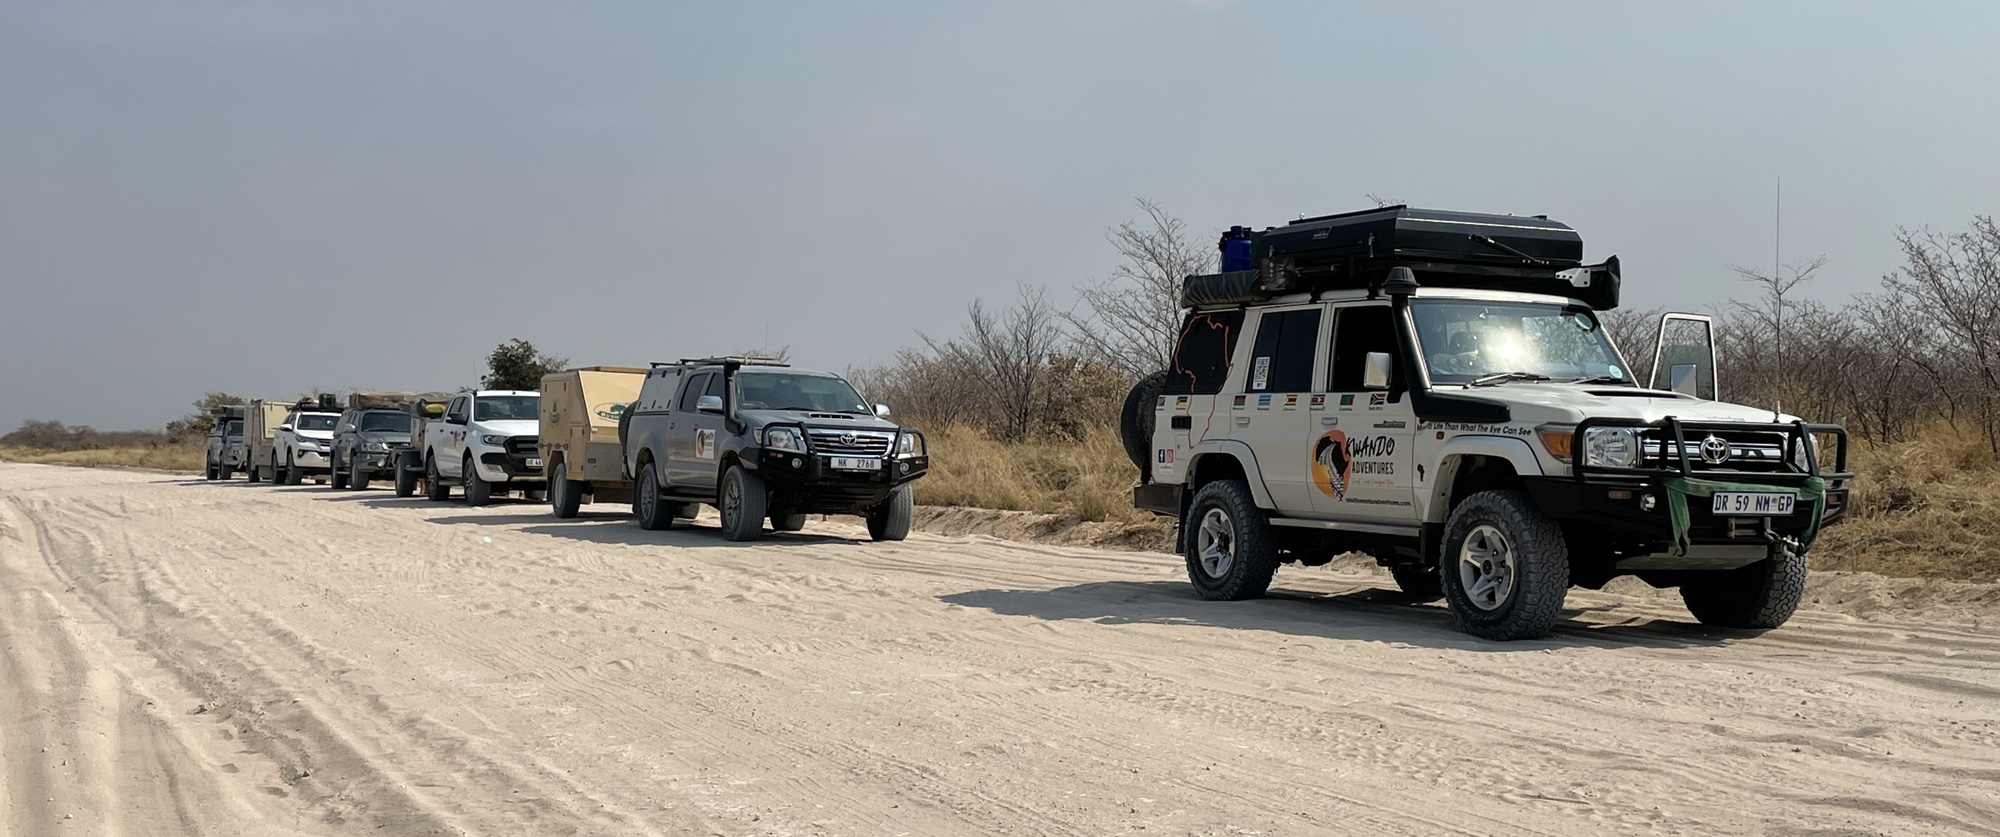 Our 6 vehicles setting off towards Xade.